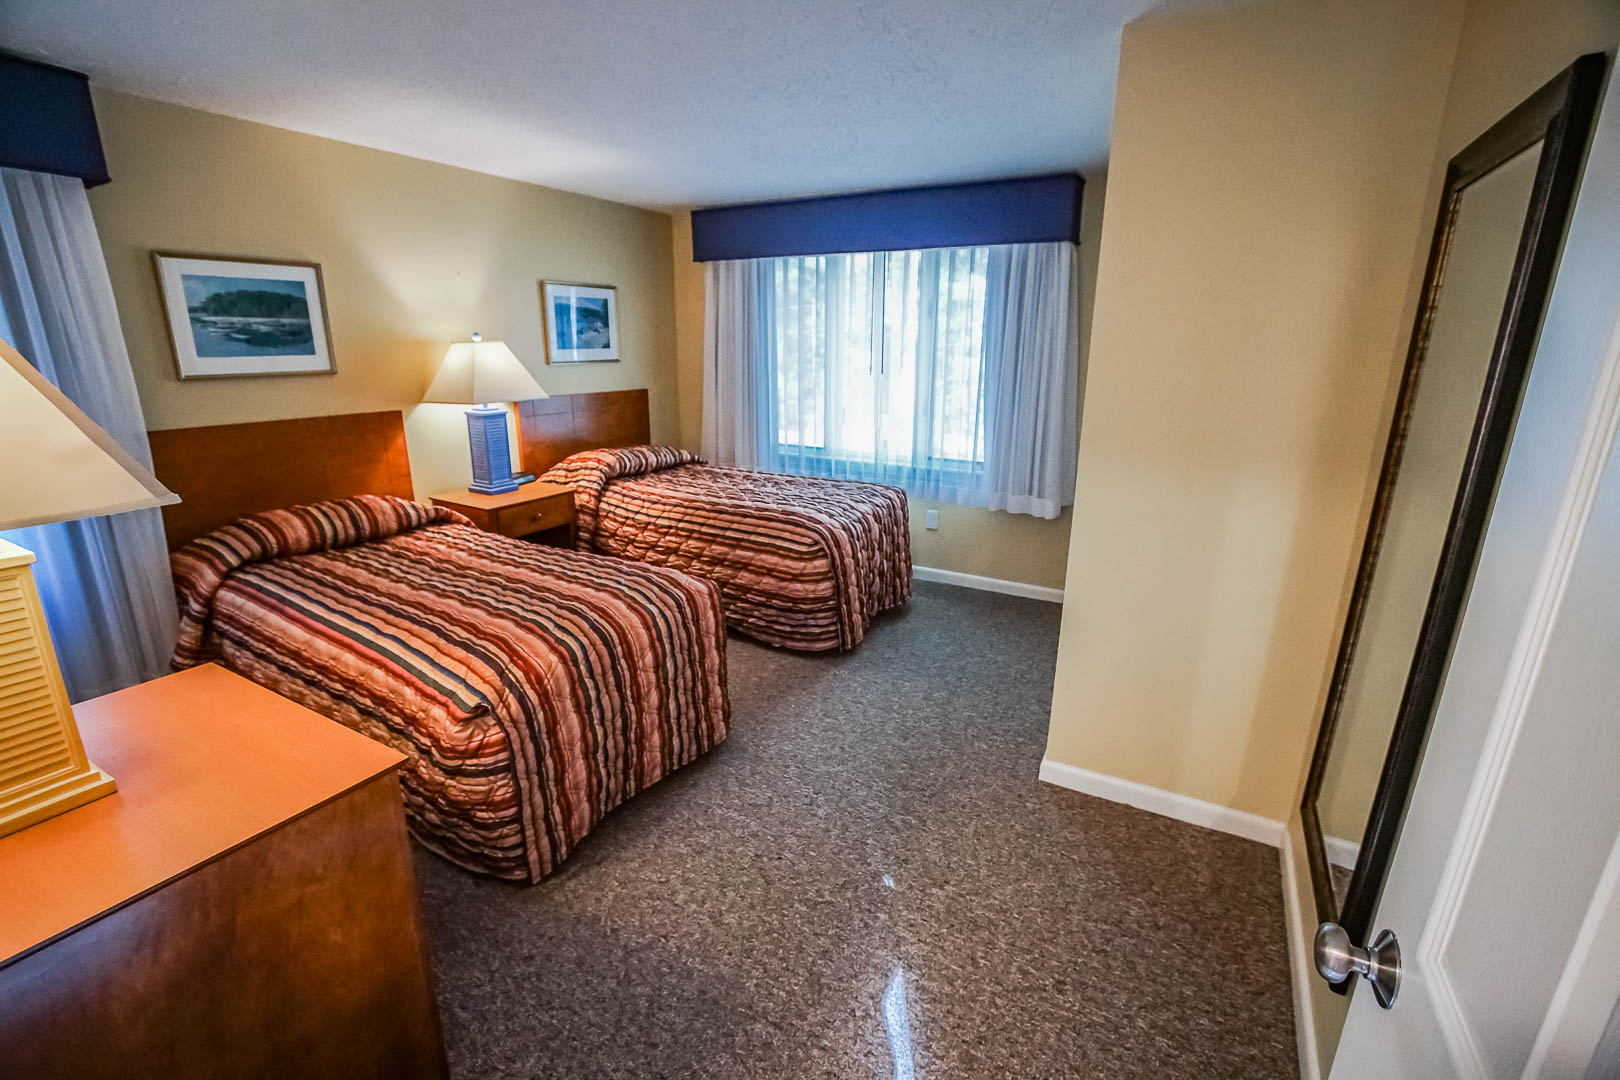 A two bedroom unit with double beds at VRI's Cape Cod Holiday Estates in Massachusetts.